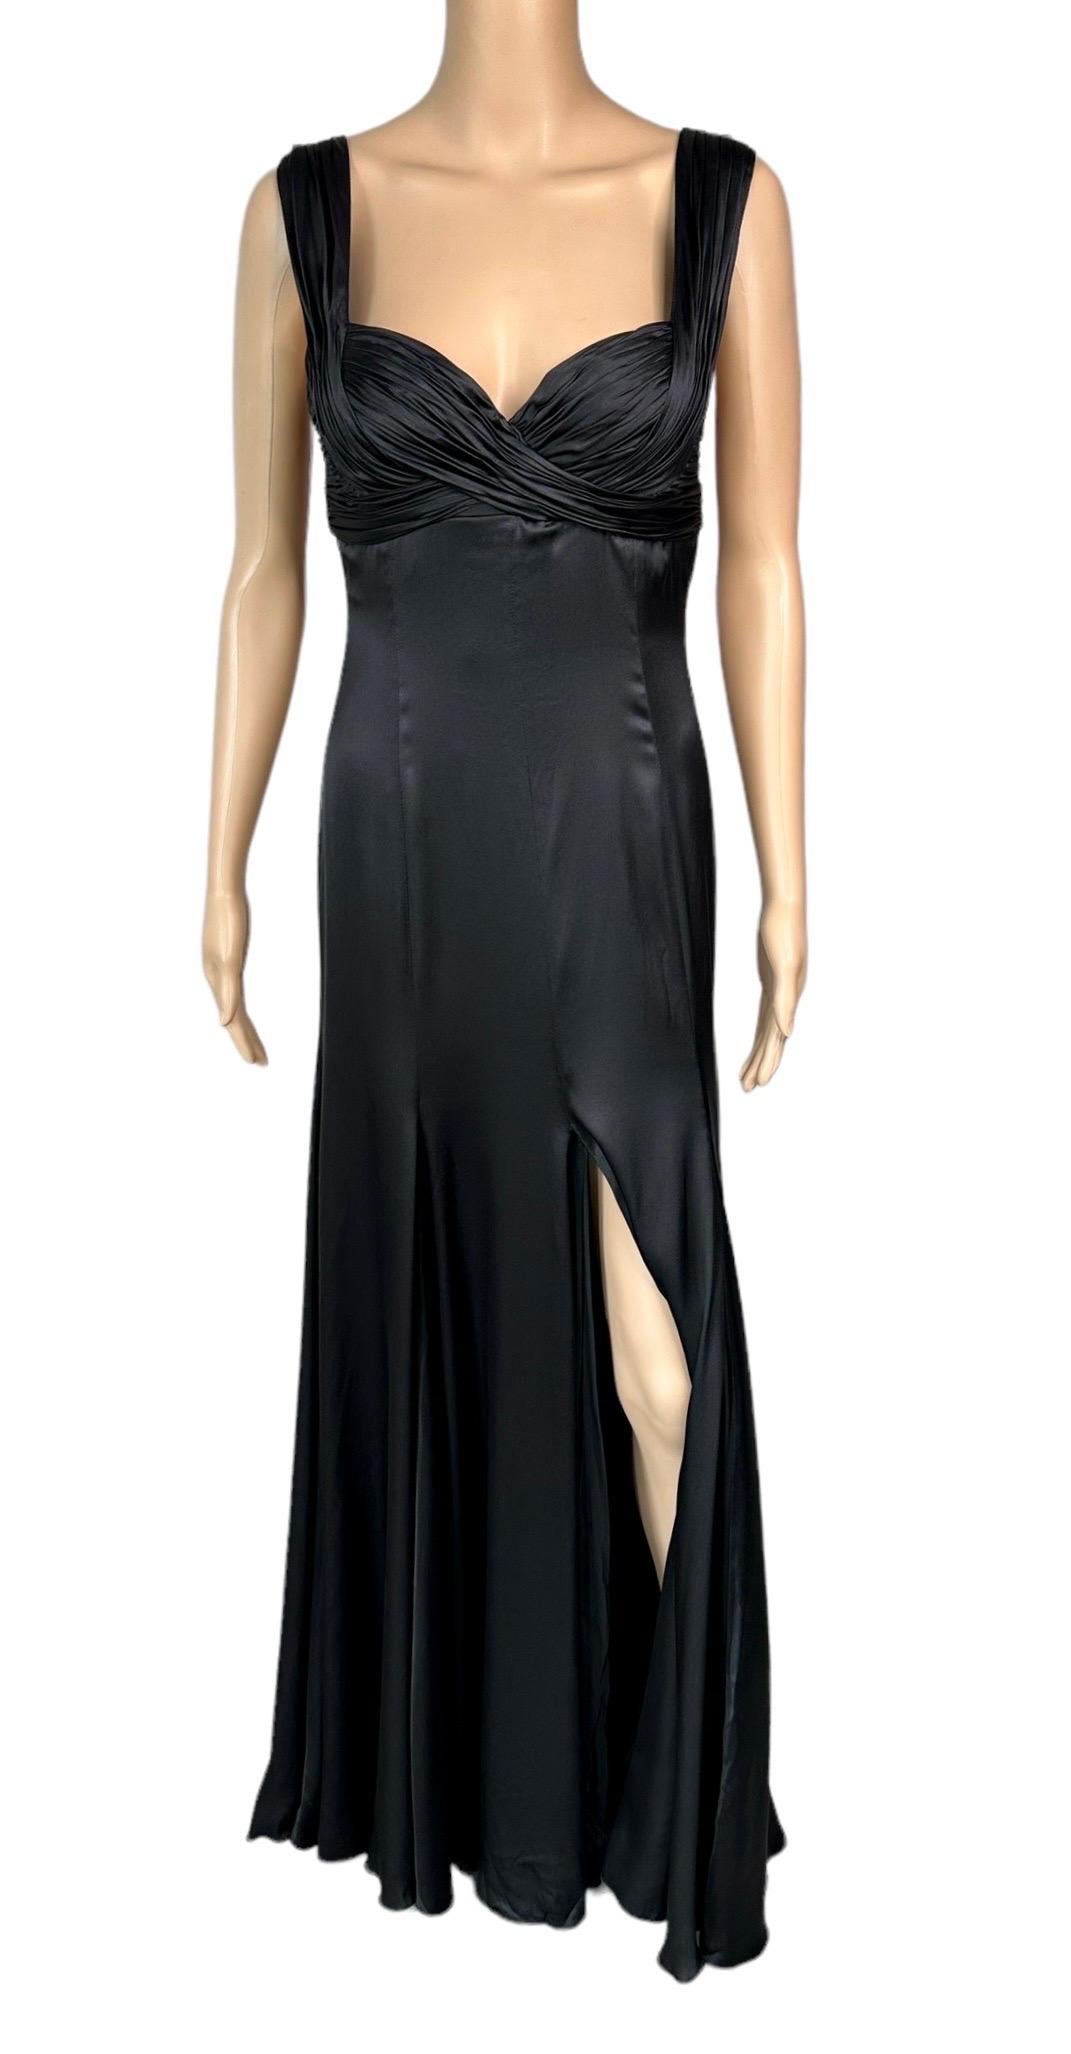 Versace S/S 2006 Bustier High Slit Silk Black Evening Dress Gown In Good Condition For Sale In Naples, FL